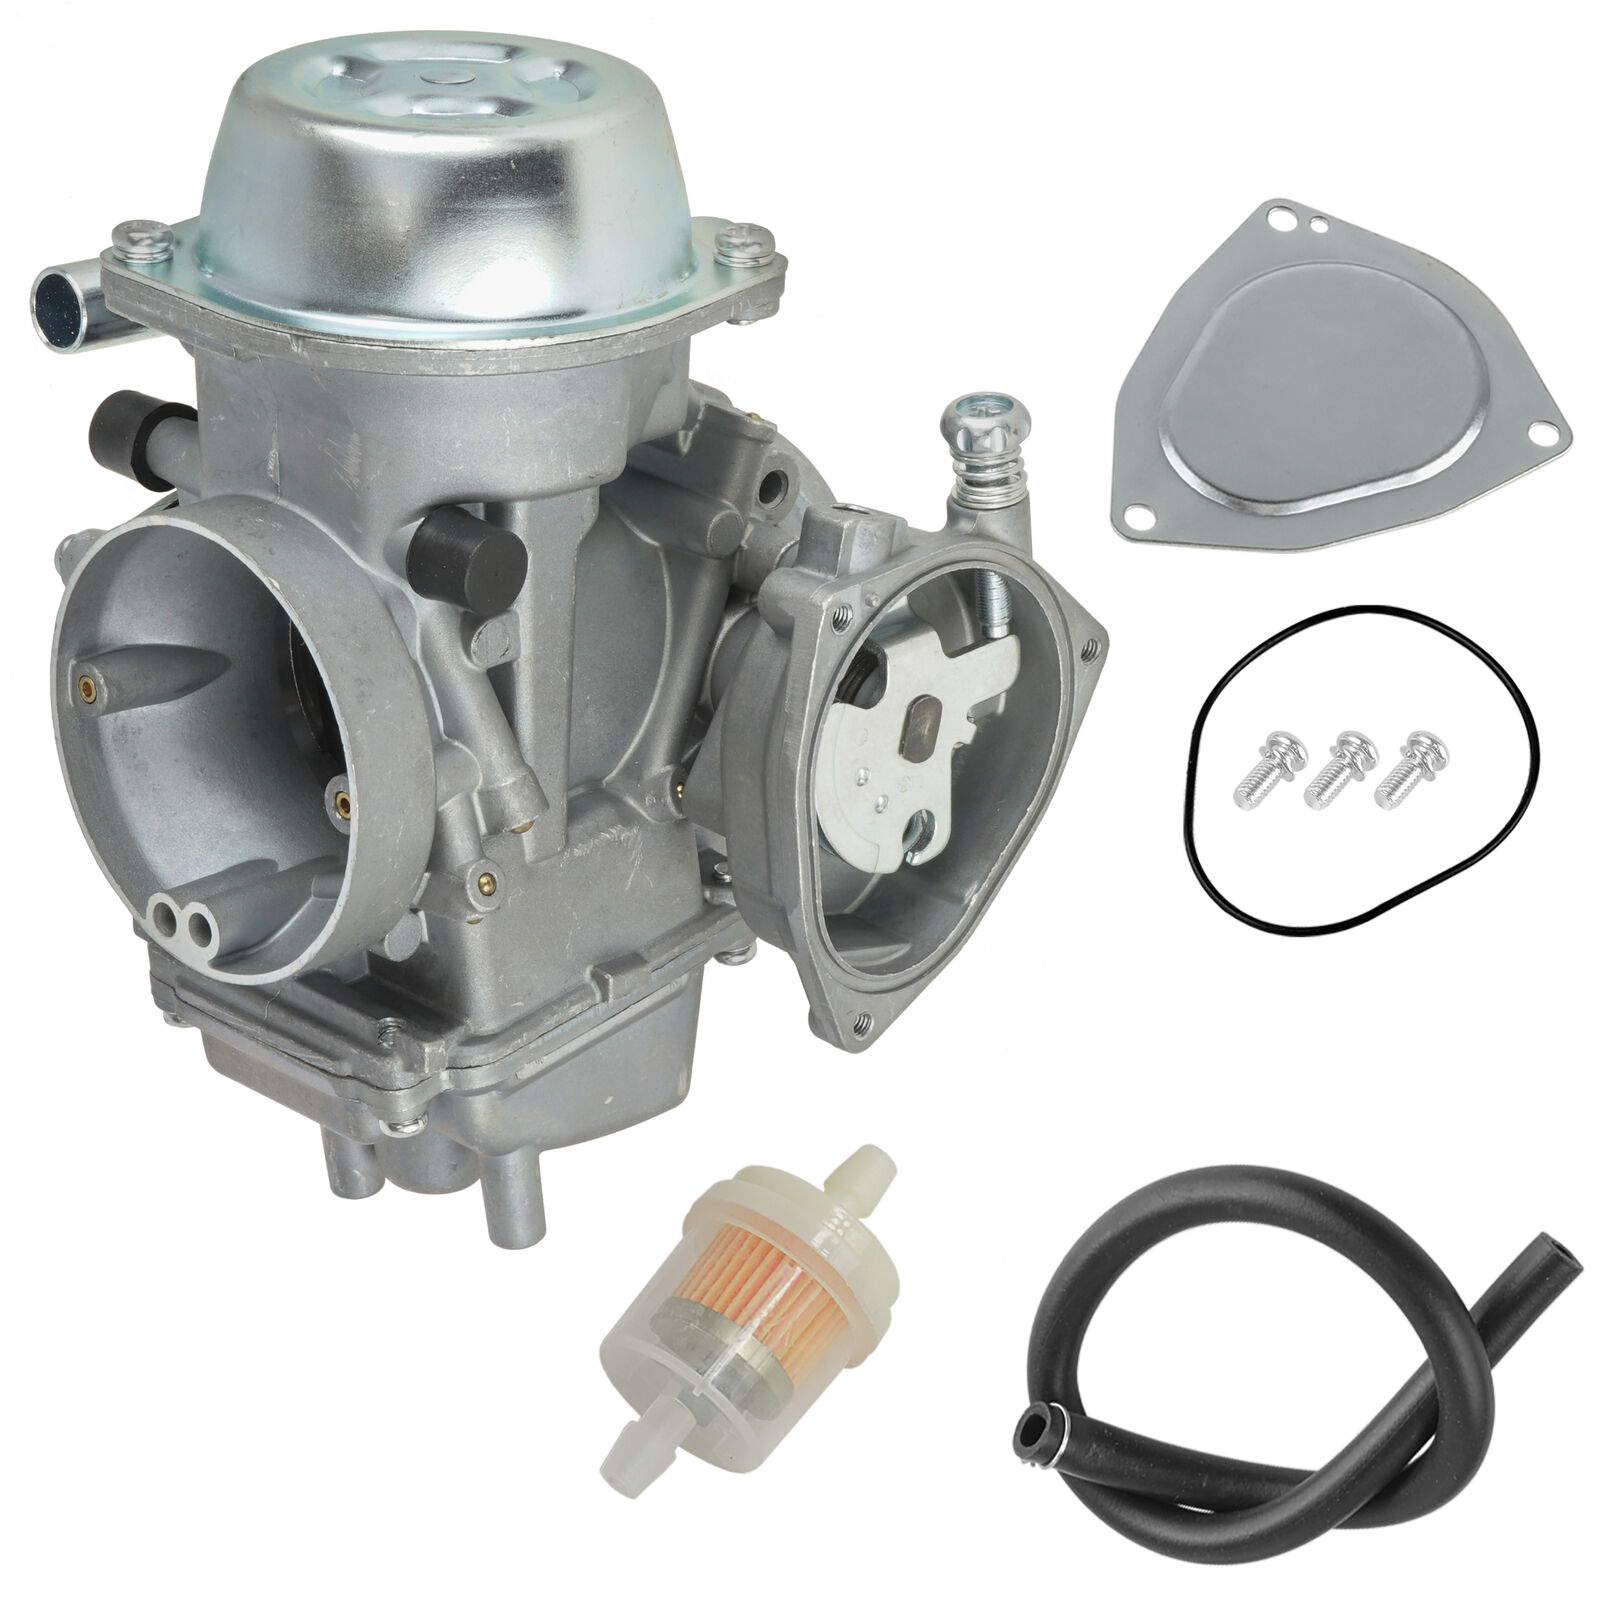 Carburetor for Bombardier Can-Am Quest 500 2002-2004